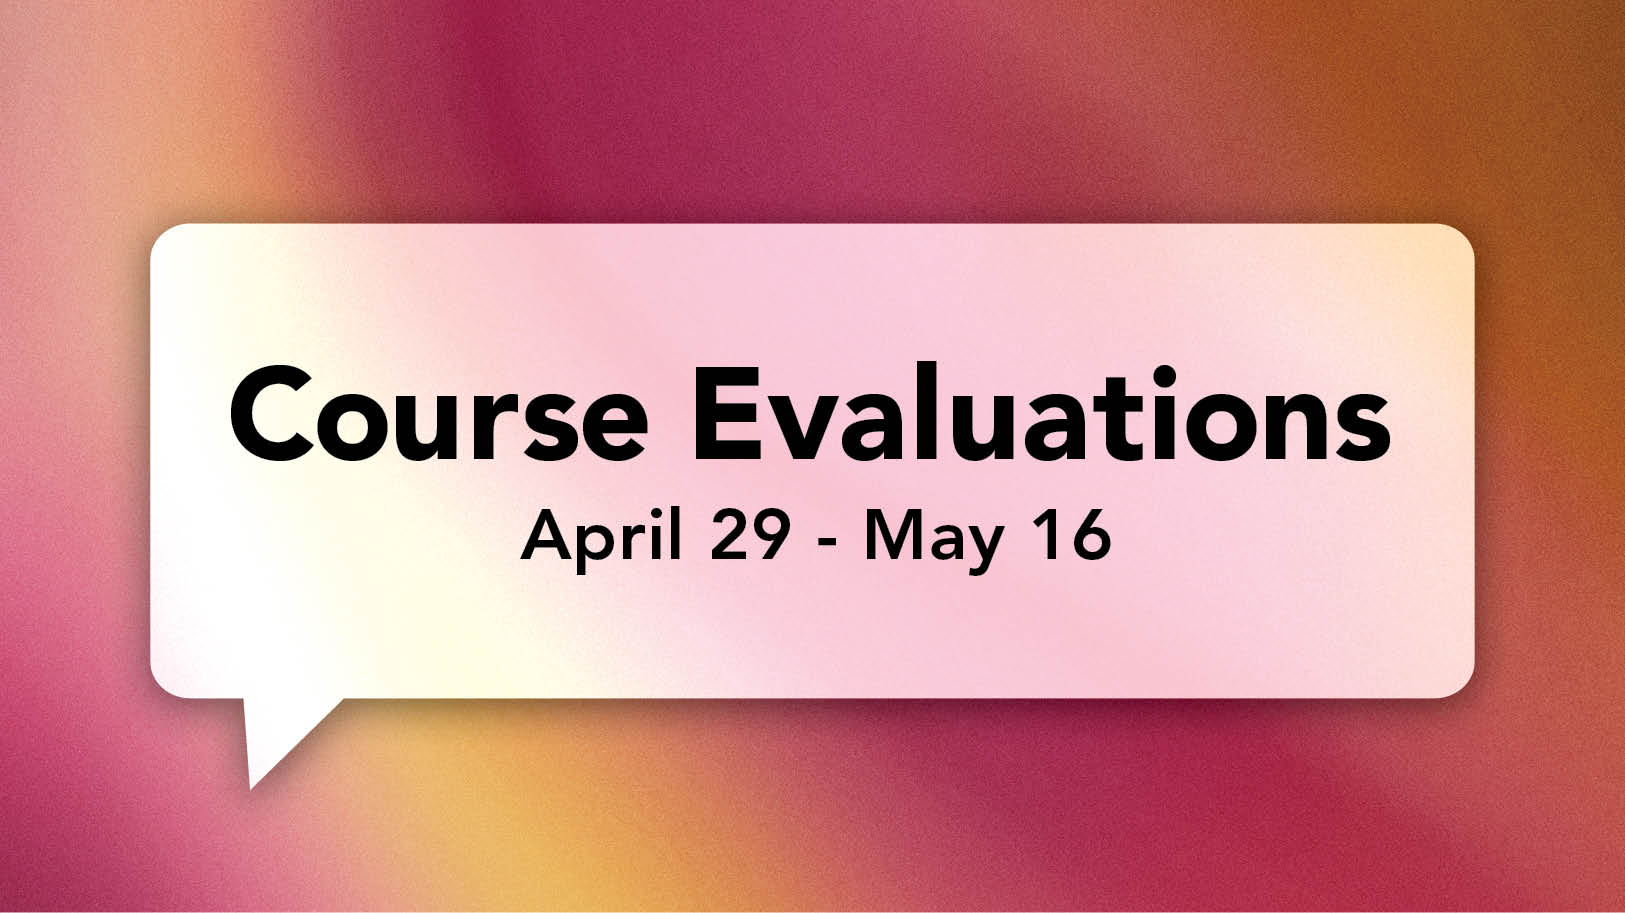 Course Evaluations April 29 - May 16